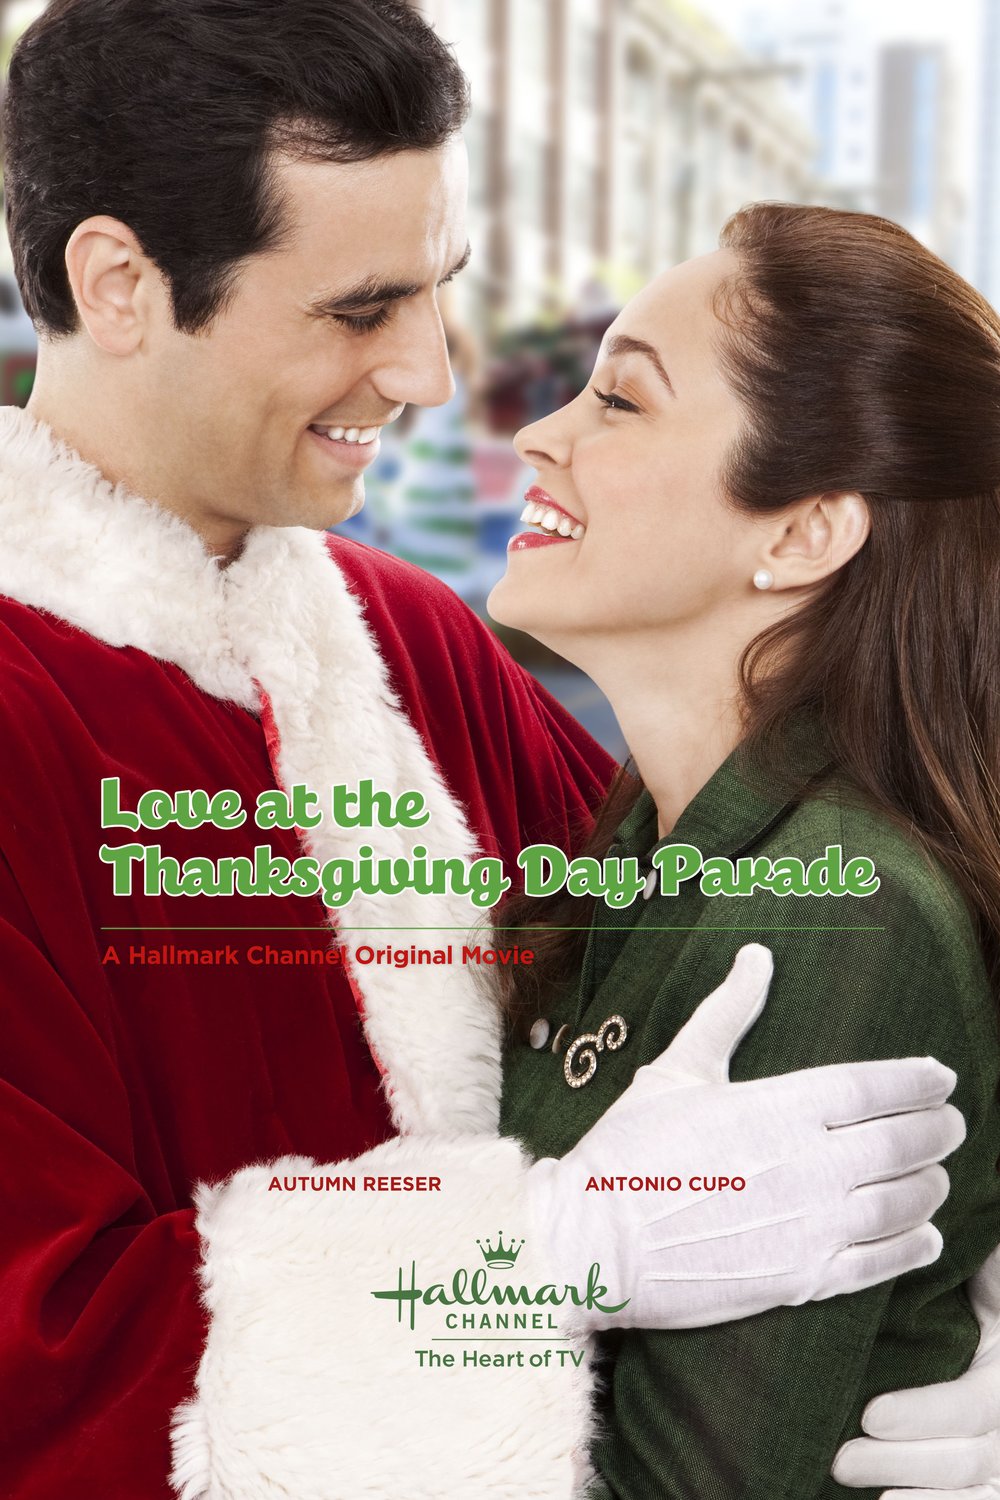 L'affiche du film Love at the Thanksgiving Day Parade